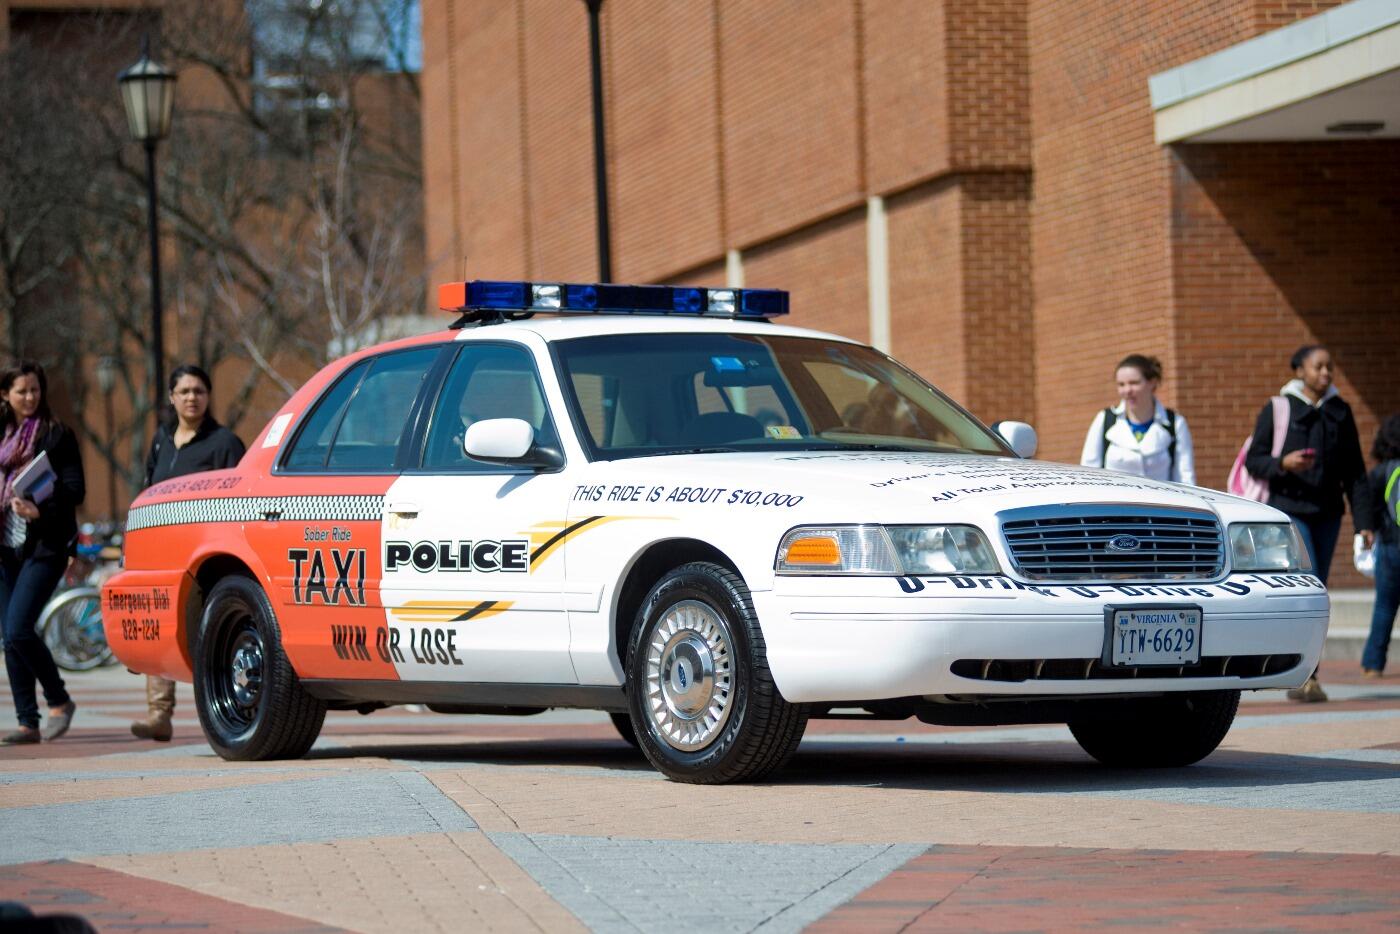 VCU Police debuted the Win or Lose Cruiser in March 2013. The vehicle is painted to be half police car, half taxi, with each side detailing the consequences and costs of a DUI charge versus taking a cab.